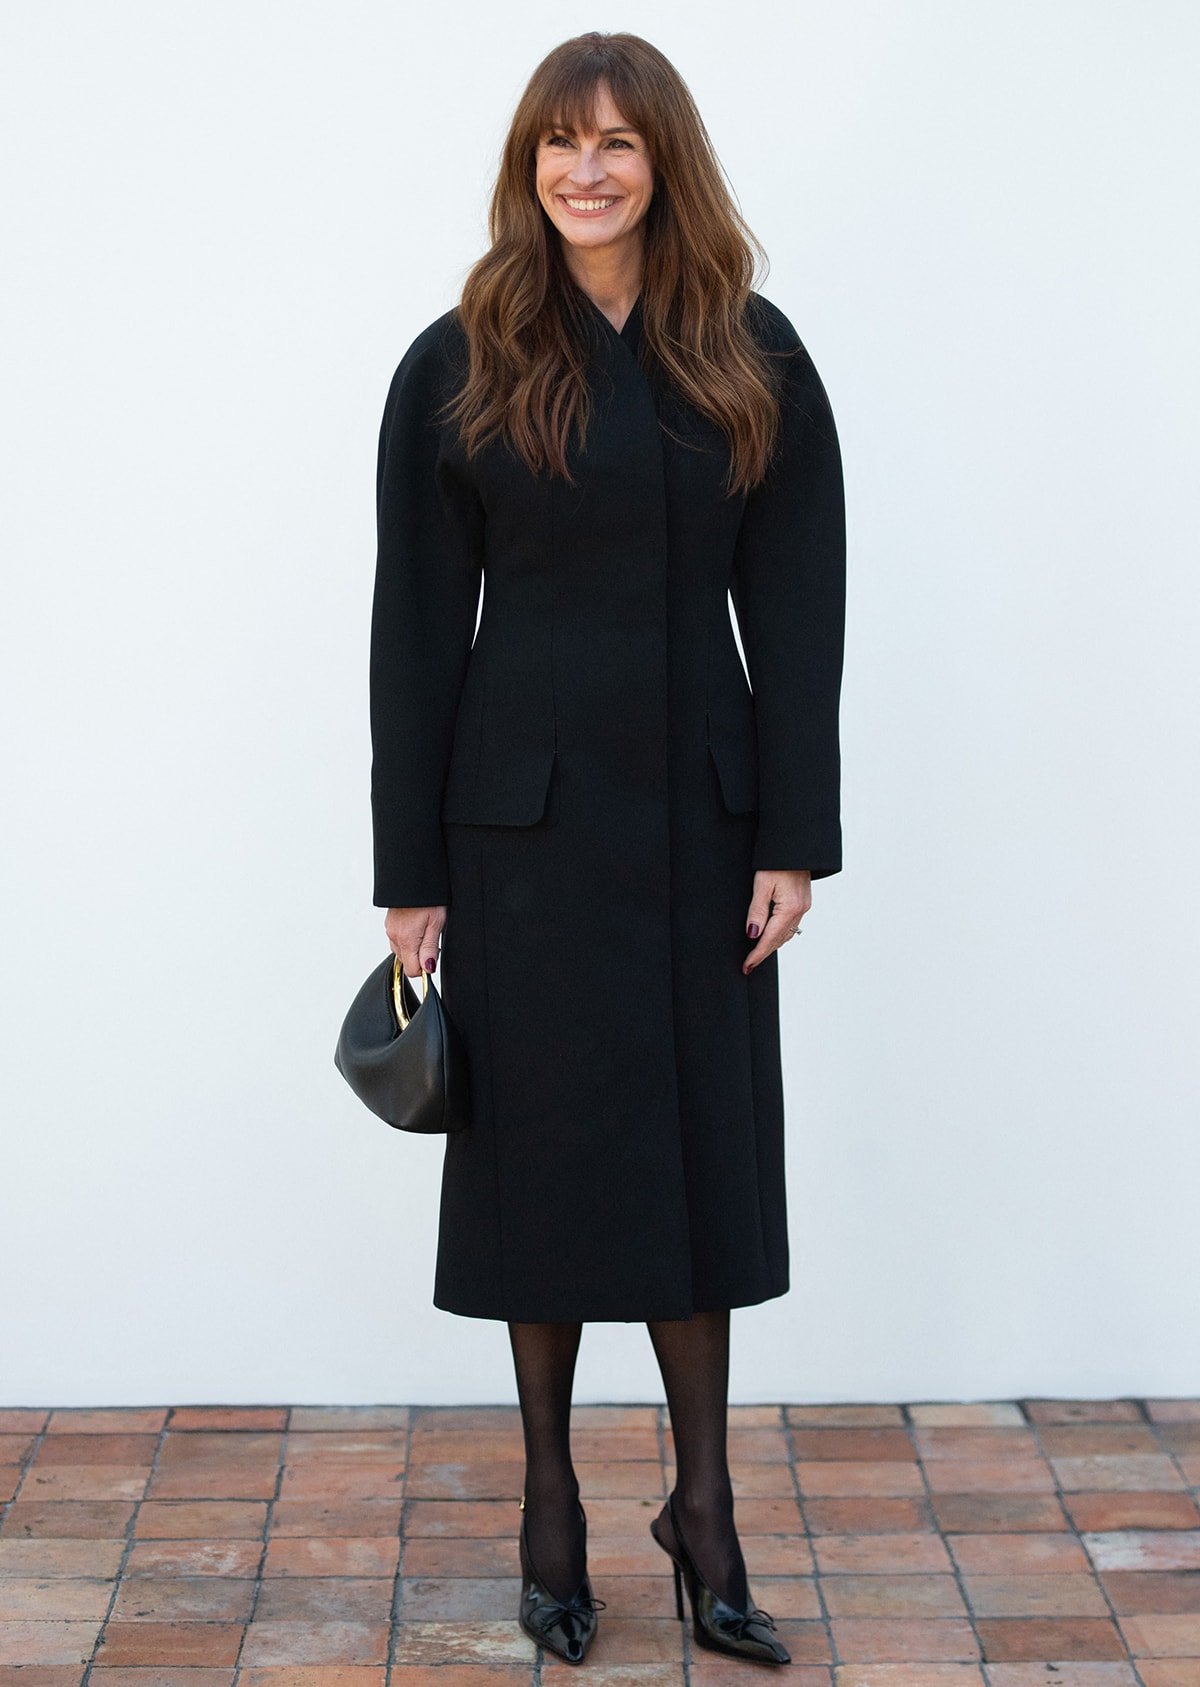 Opting for a regal look, Julia Roberts embraces quiet luxury in a structured black Jacquemus coat dress, sheer tights, and Jacquemus Les Slingbacks Cubito Hautes shoes